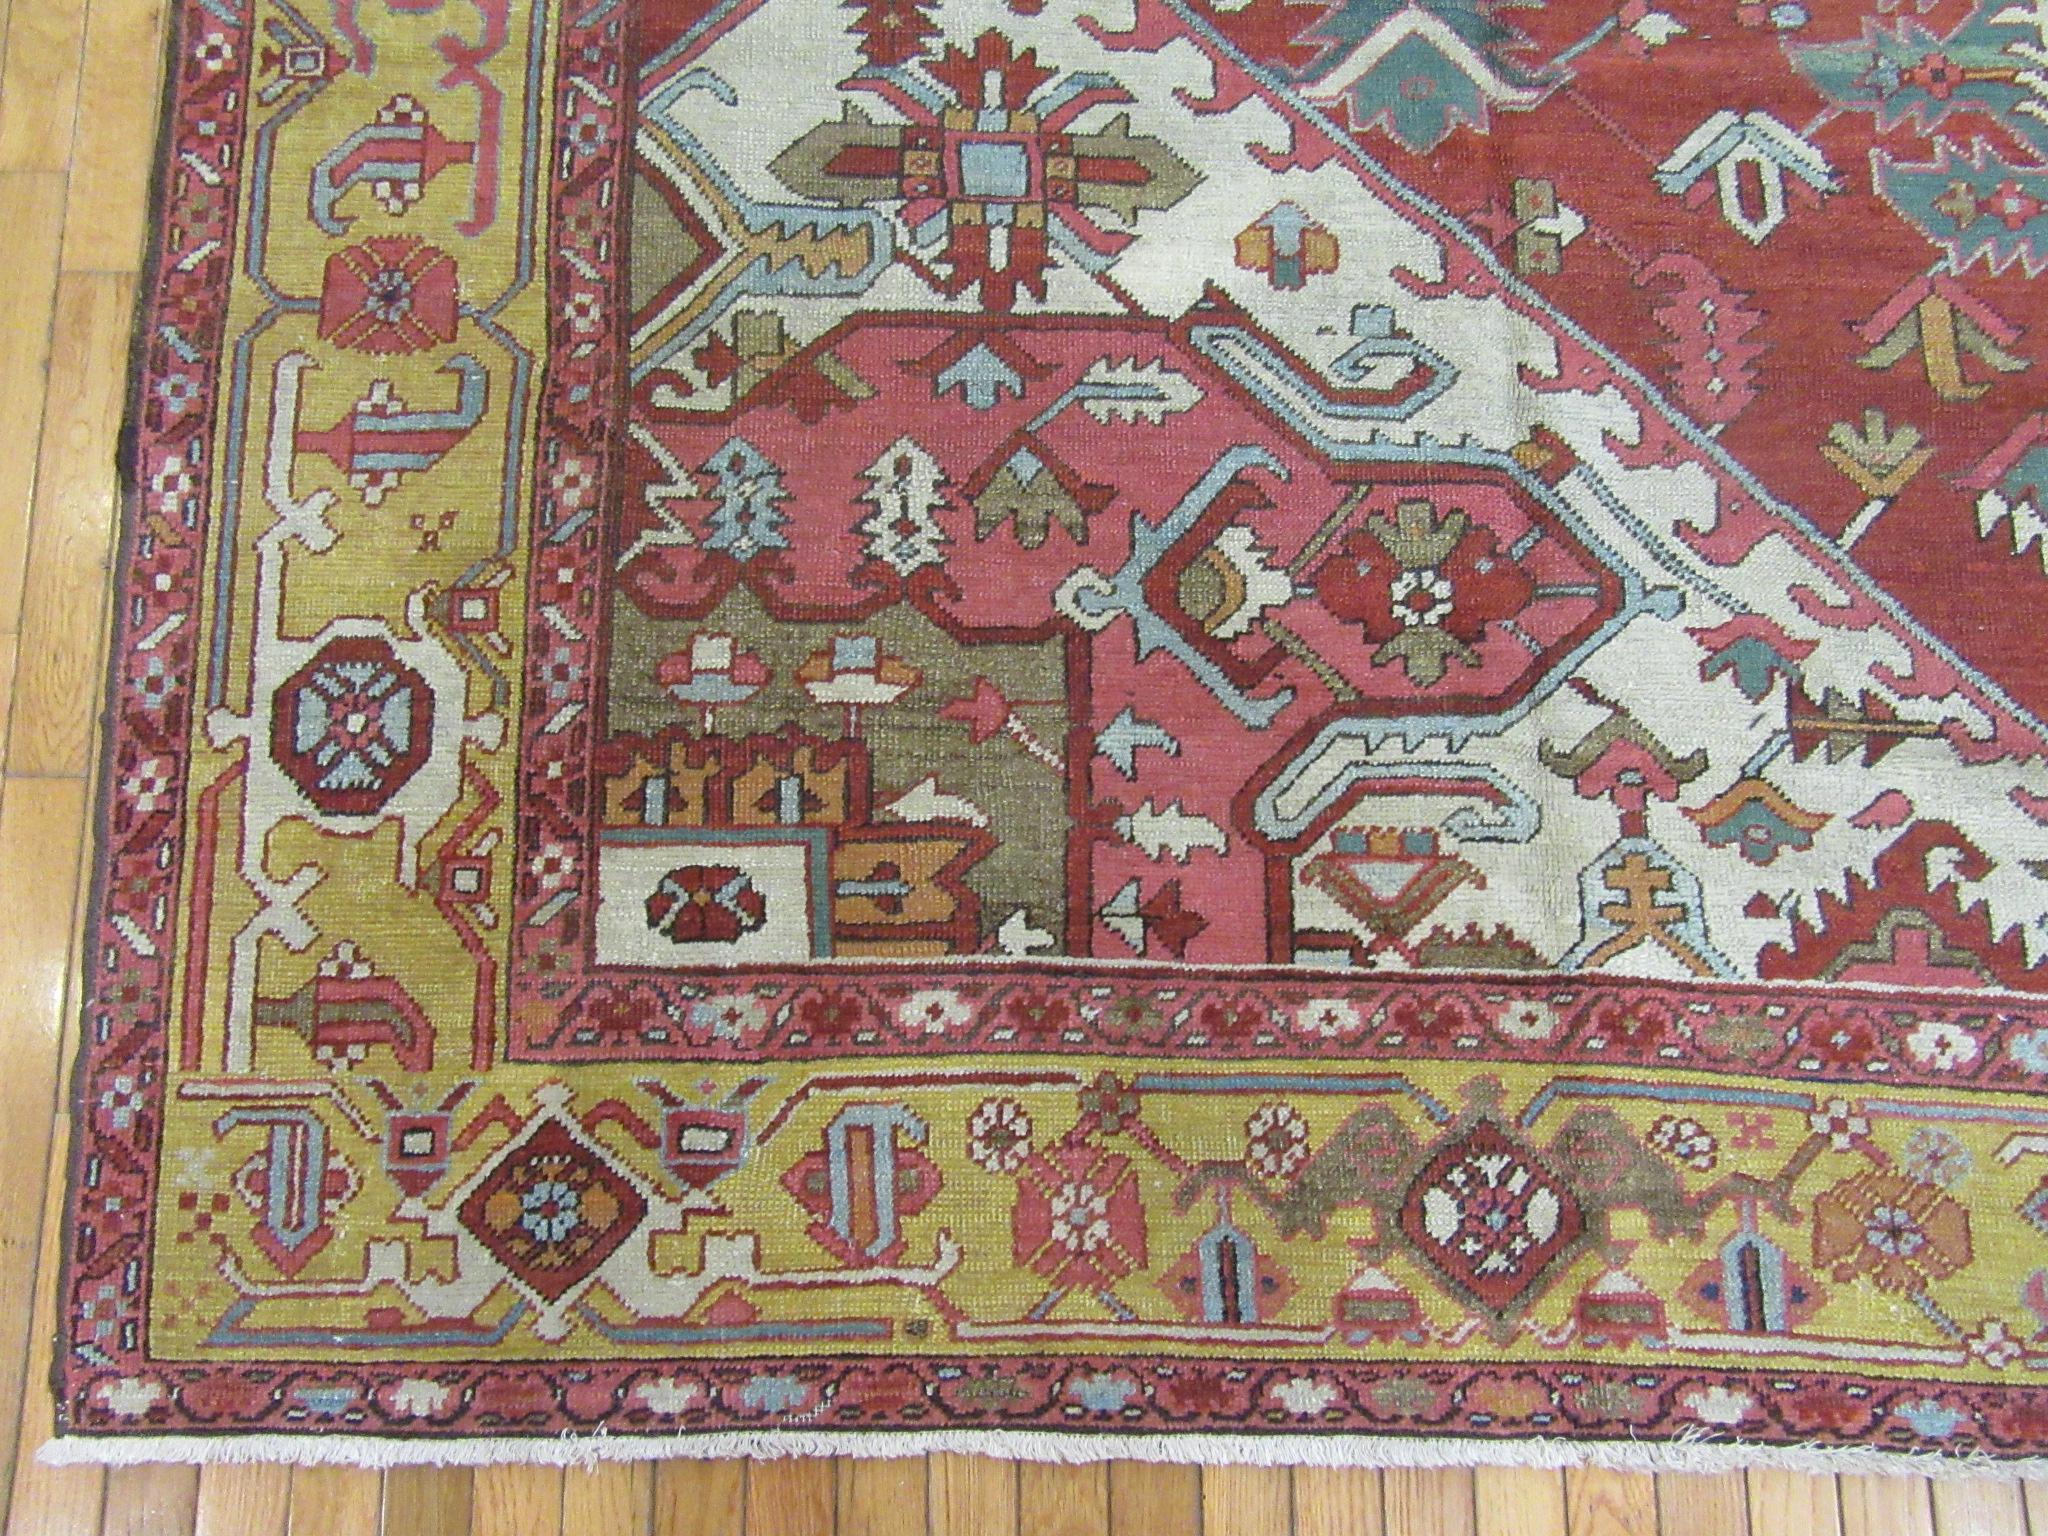 Large Room Size Antique Hand Knotted wool Red Teal and Gold Persian Serapi Rug In Excellent Condition For Sale In Atlanta, GA